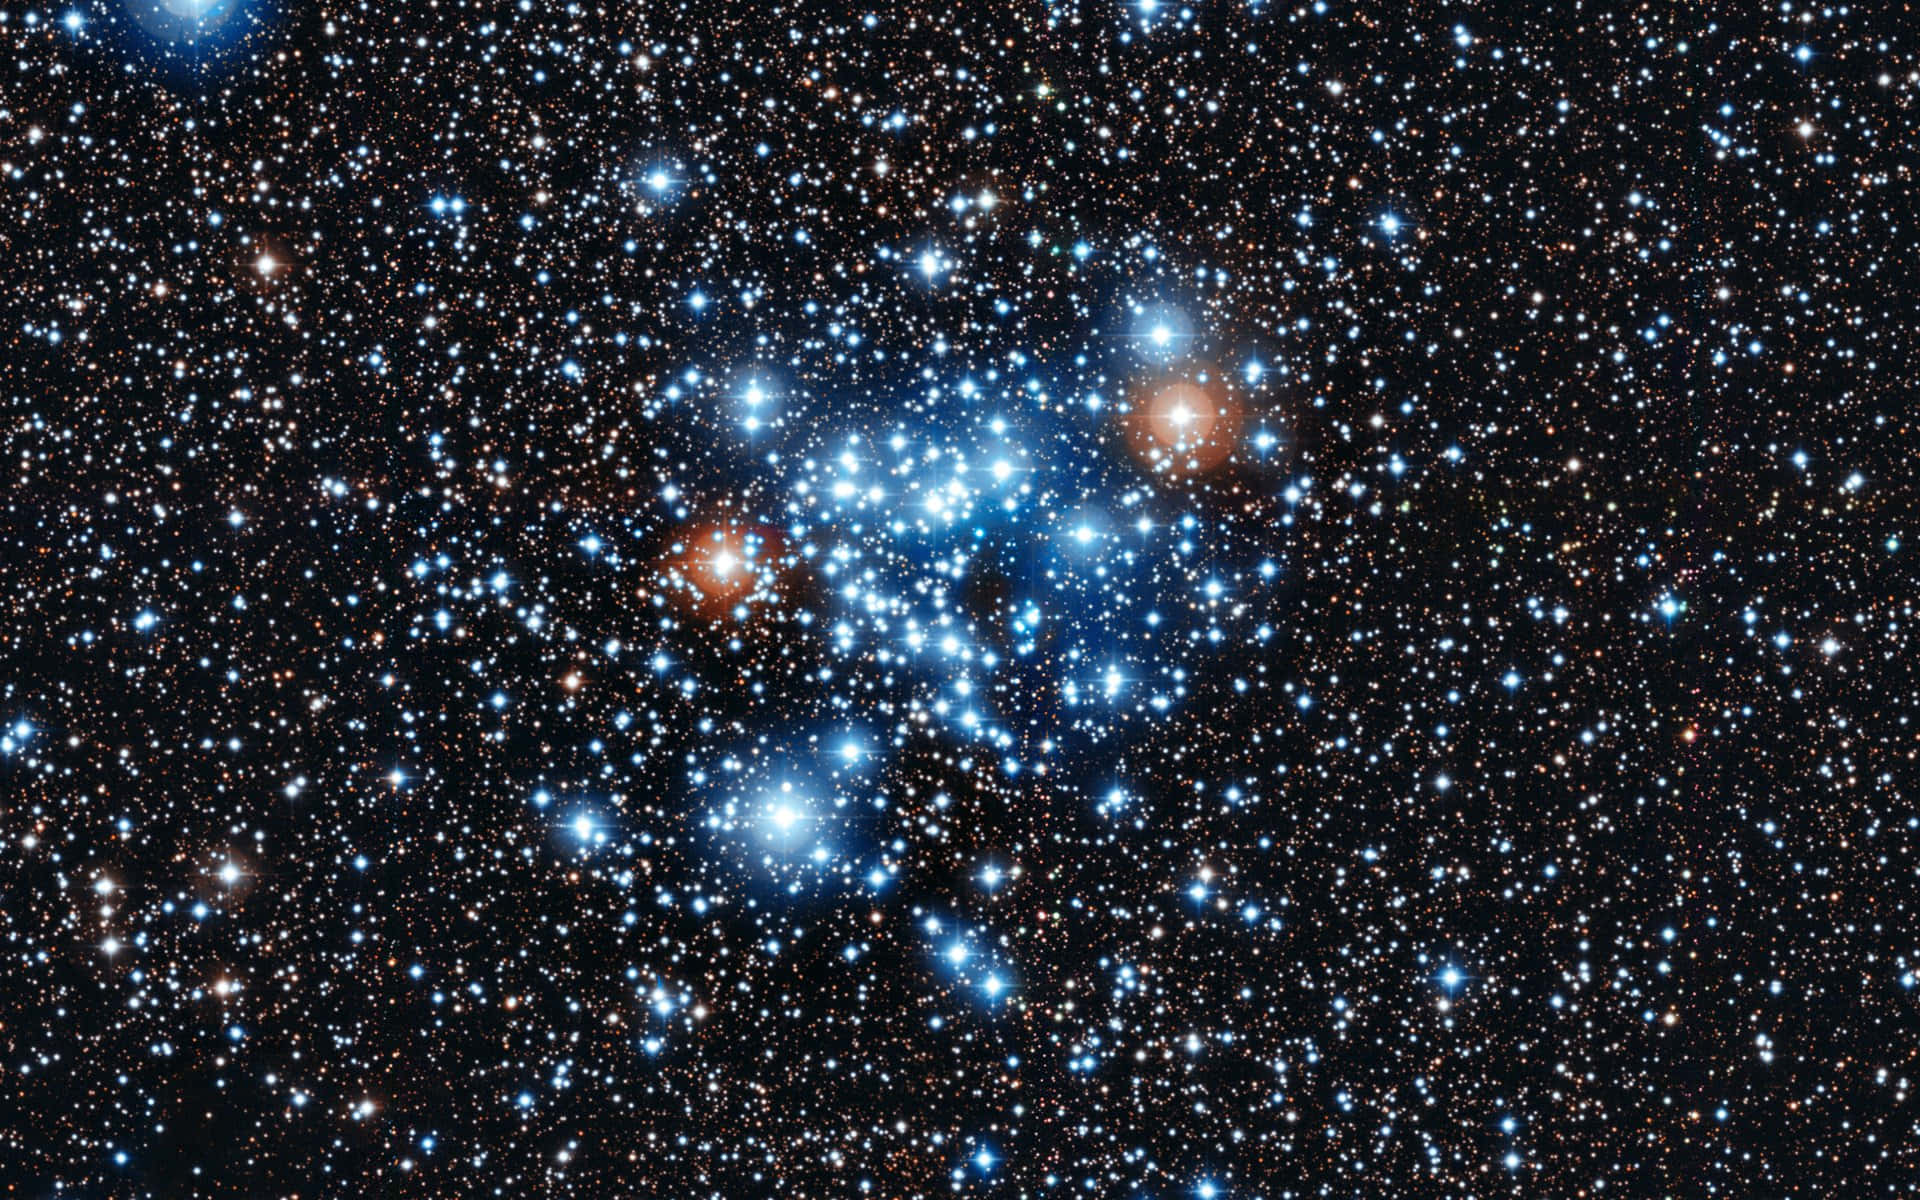 Caption: A Majestic Star Cluster Lighting up the Night Sky Wallpaper